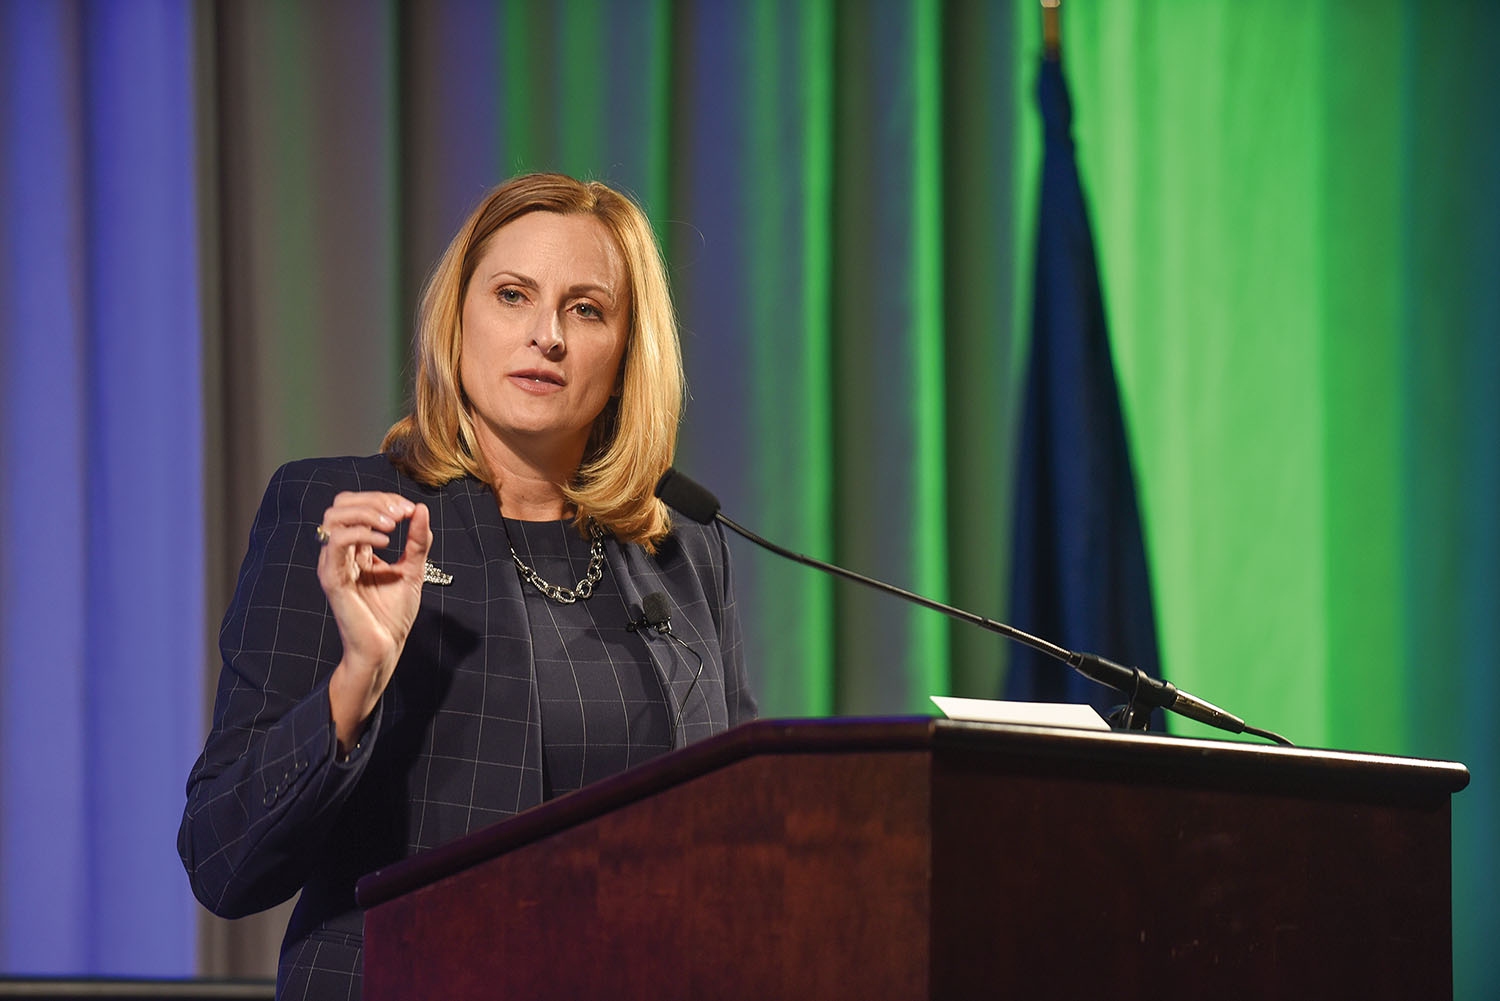 Brandy Christian, president and CEO of the Port of New Orleans, delivers her annual State of the Port address September 11. (Photo courtesy of Port of New Orleans)